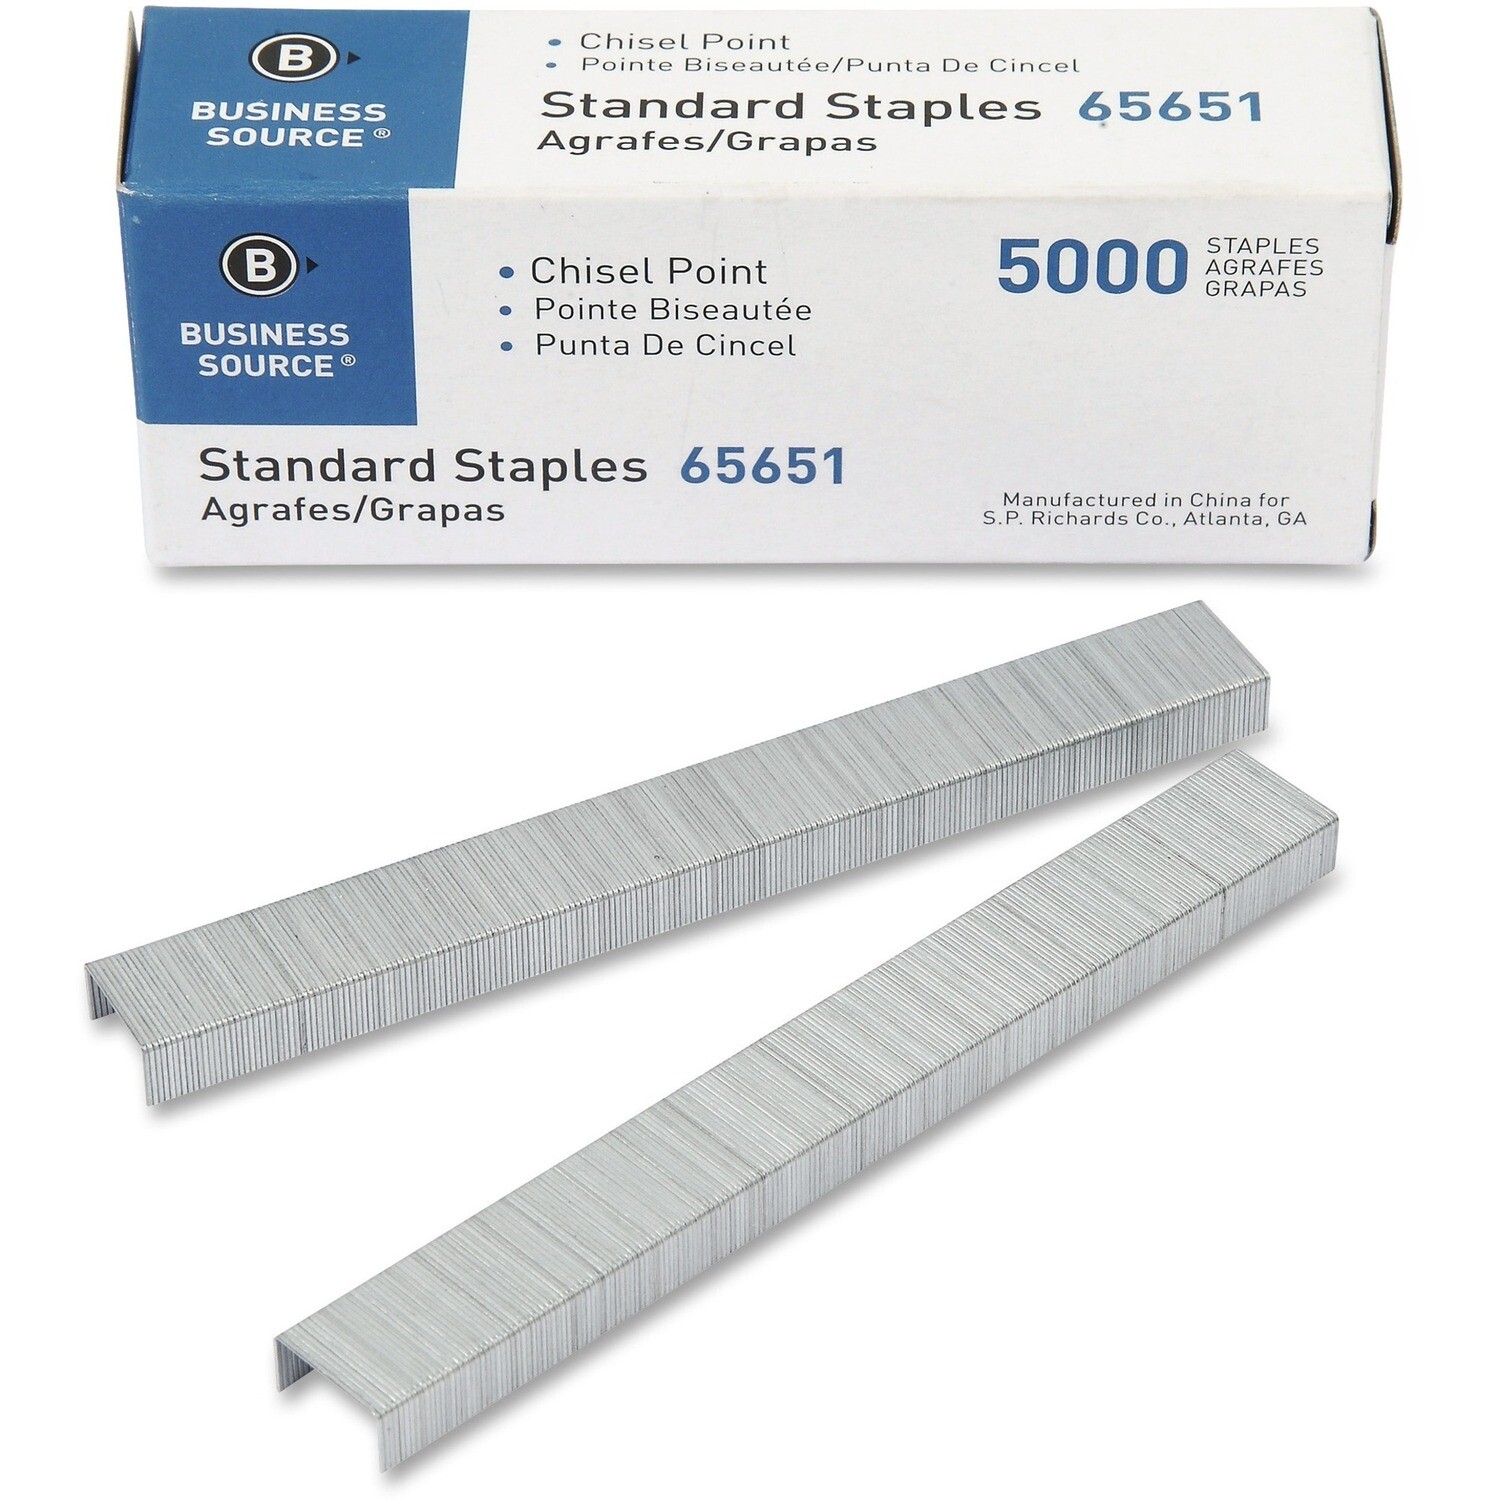 Staples, Standard 1/4" x 1/2", Chisel, Business Source